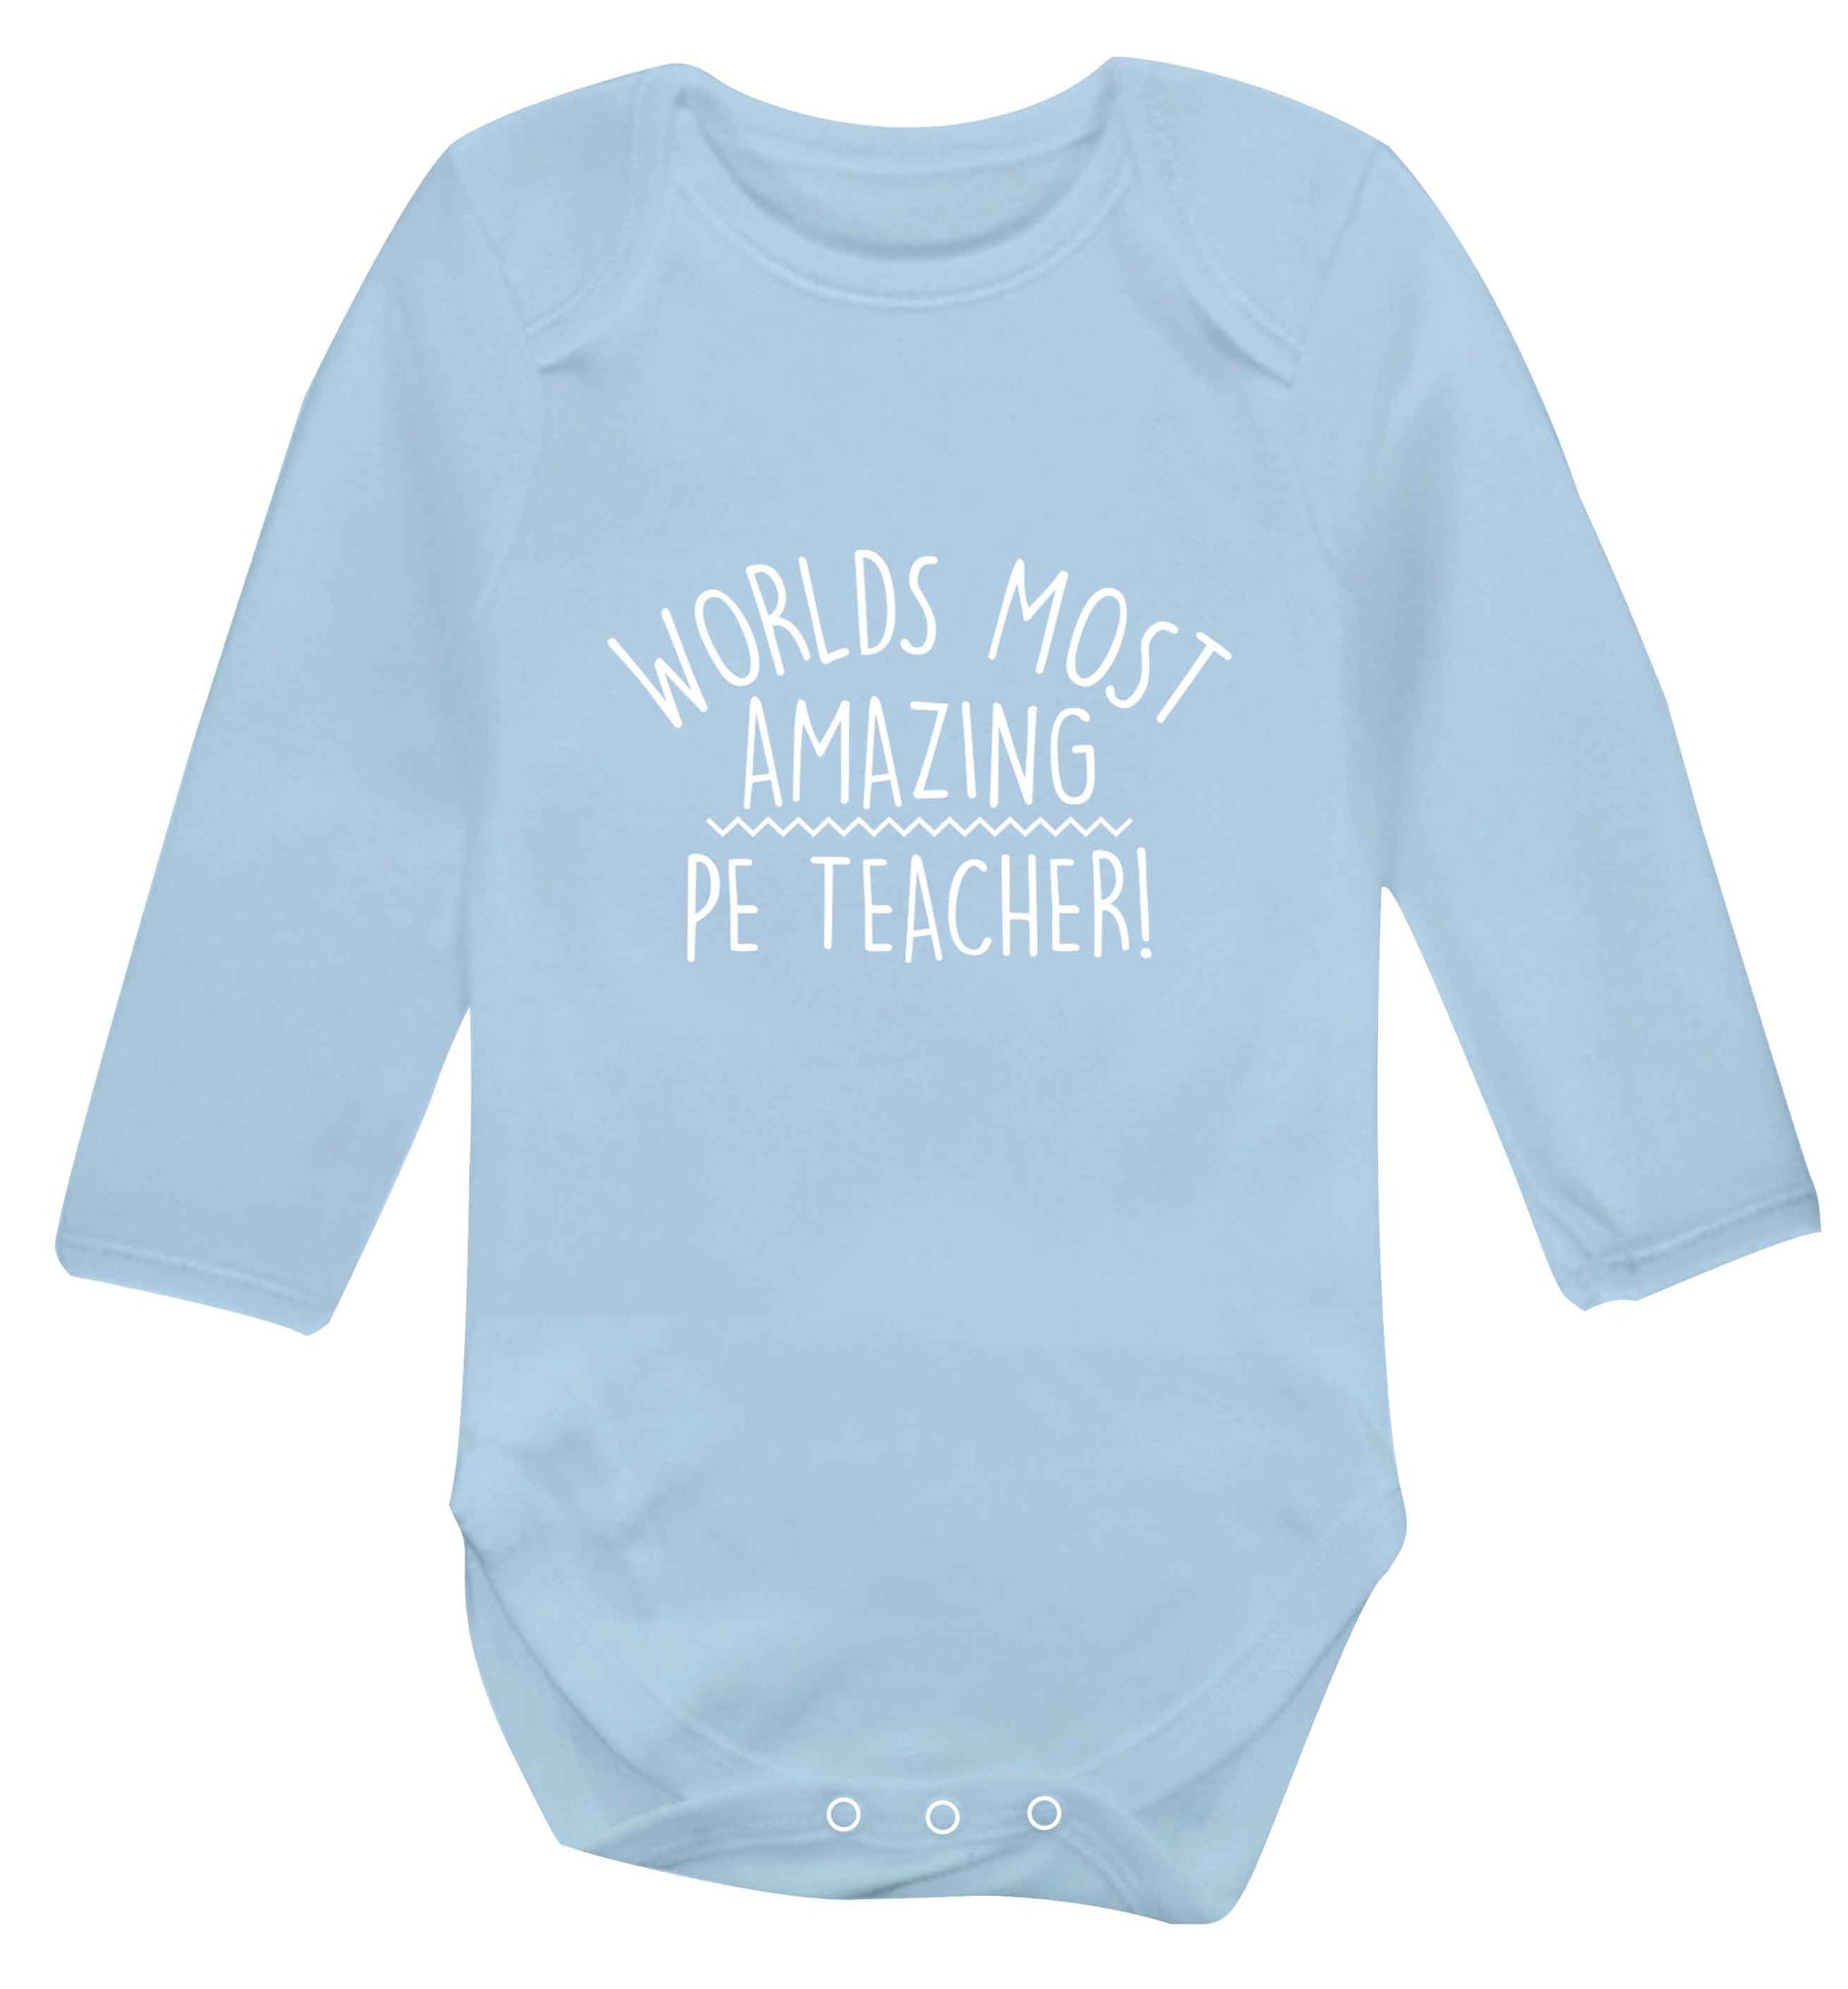 Worlds most amazing PE teacher baby vest long sleeved pale blue 6-12 months